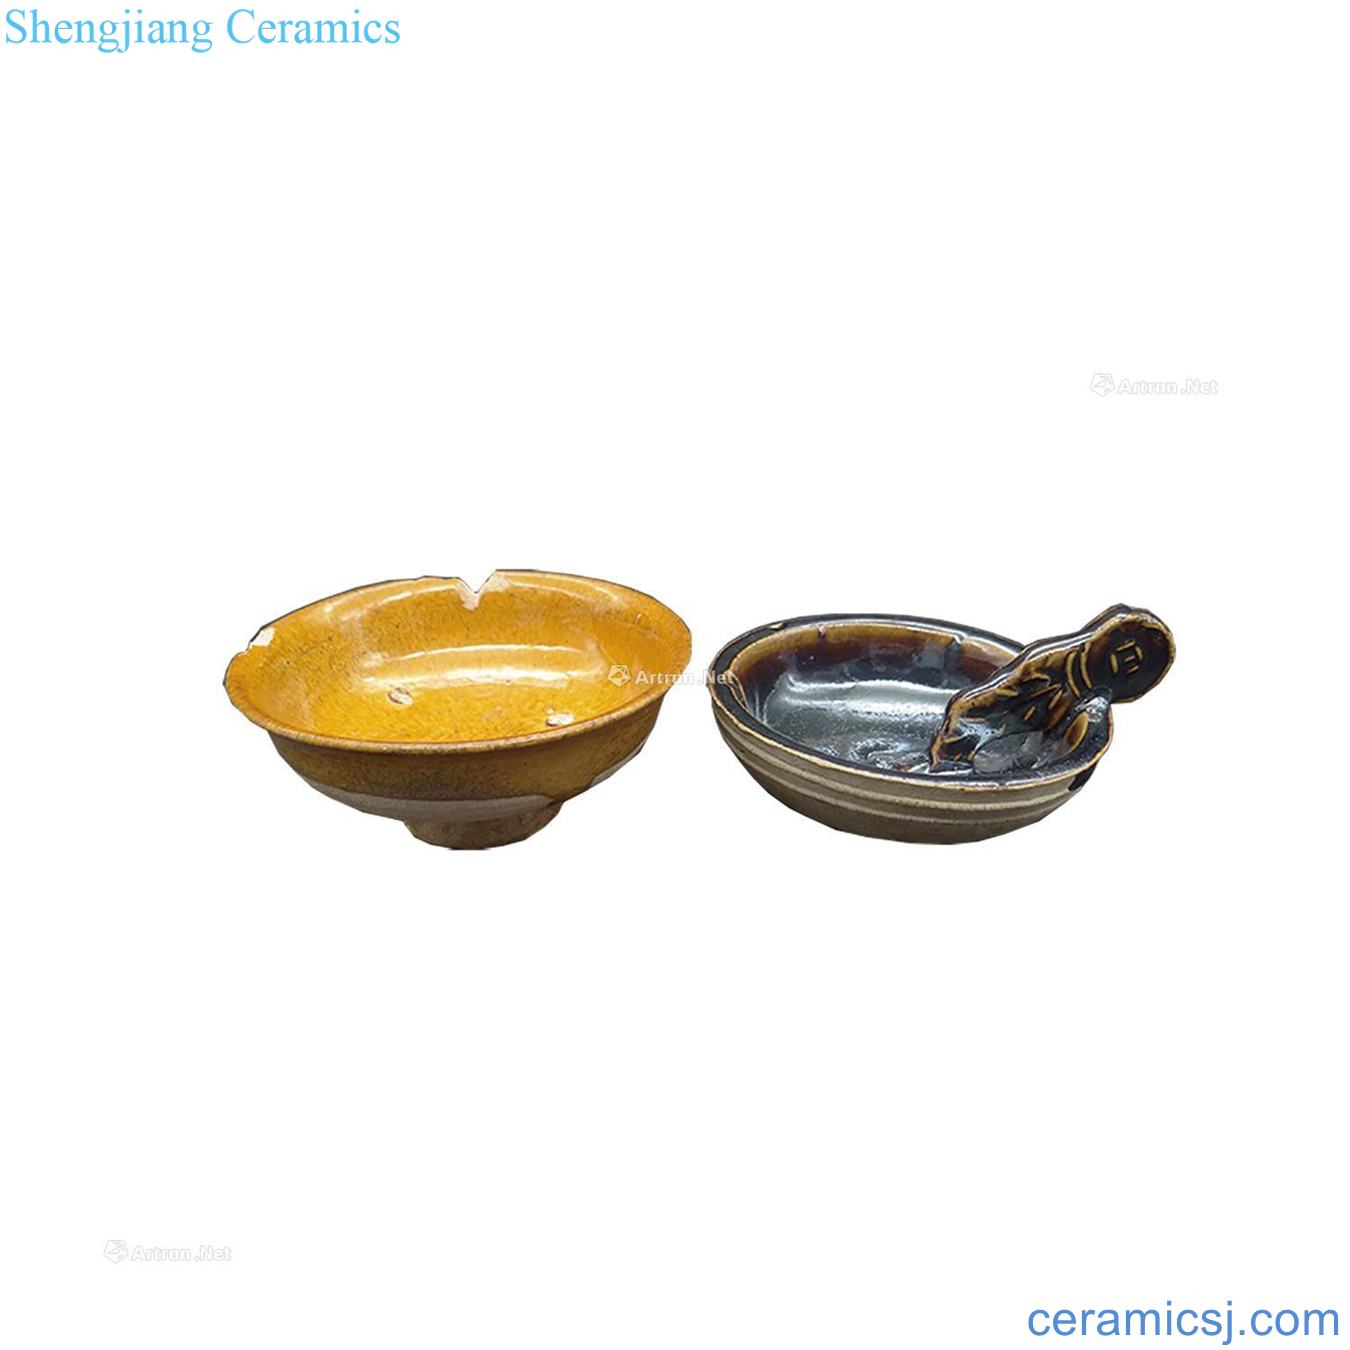 Song dynasty porcelain (group a)